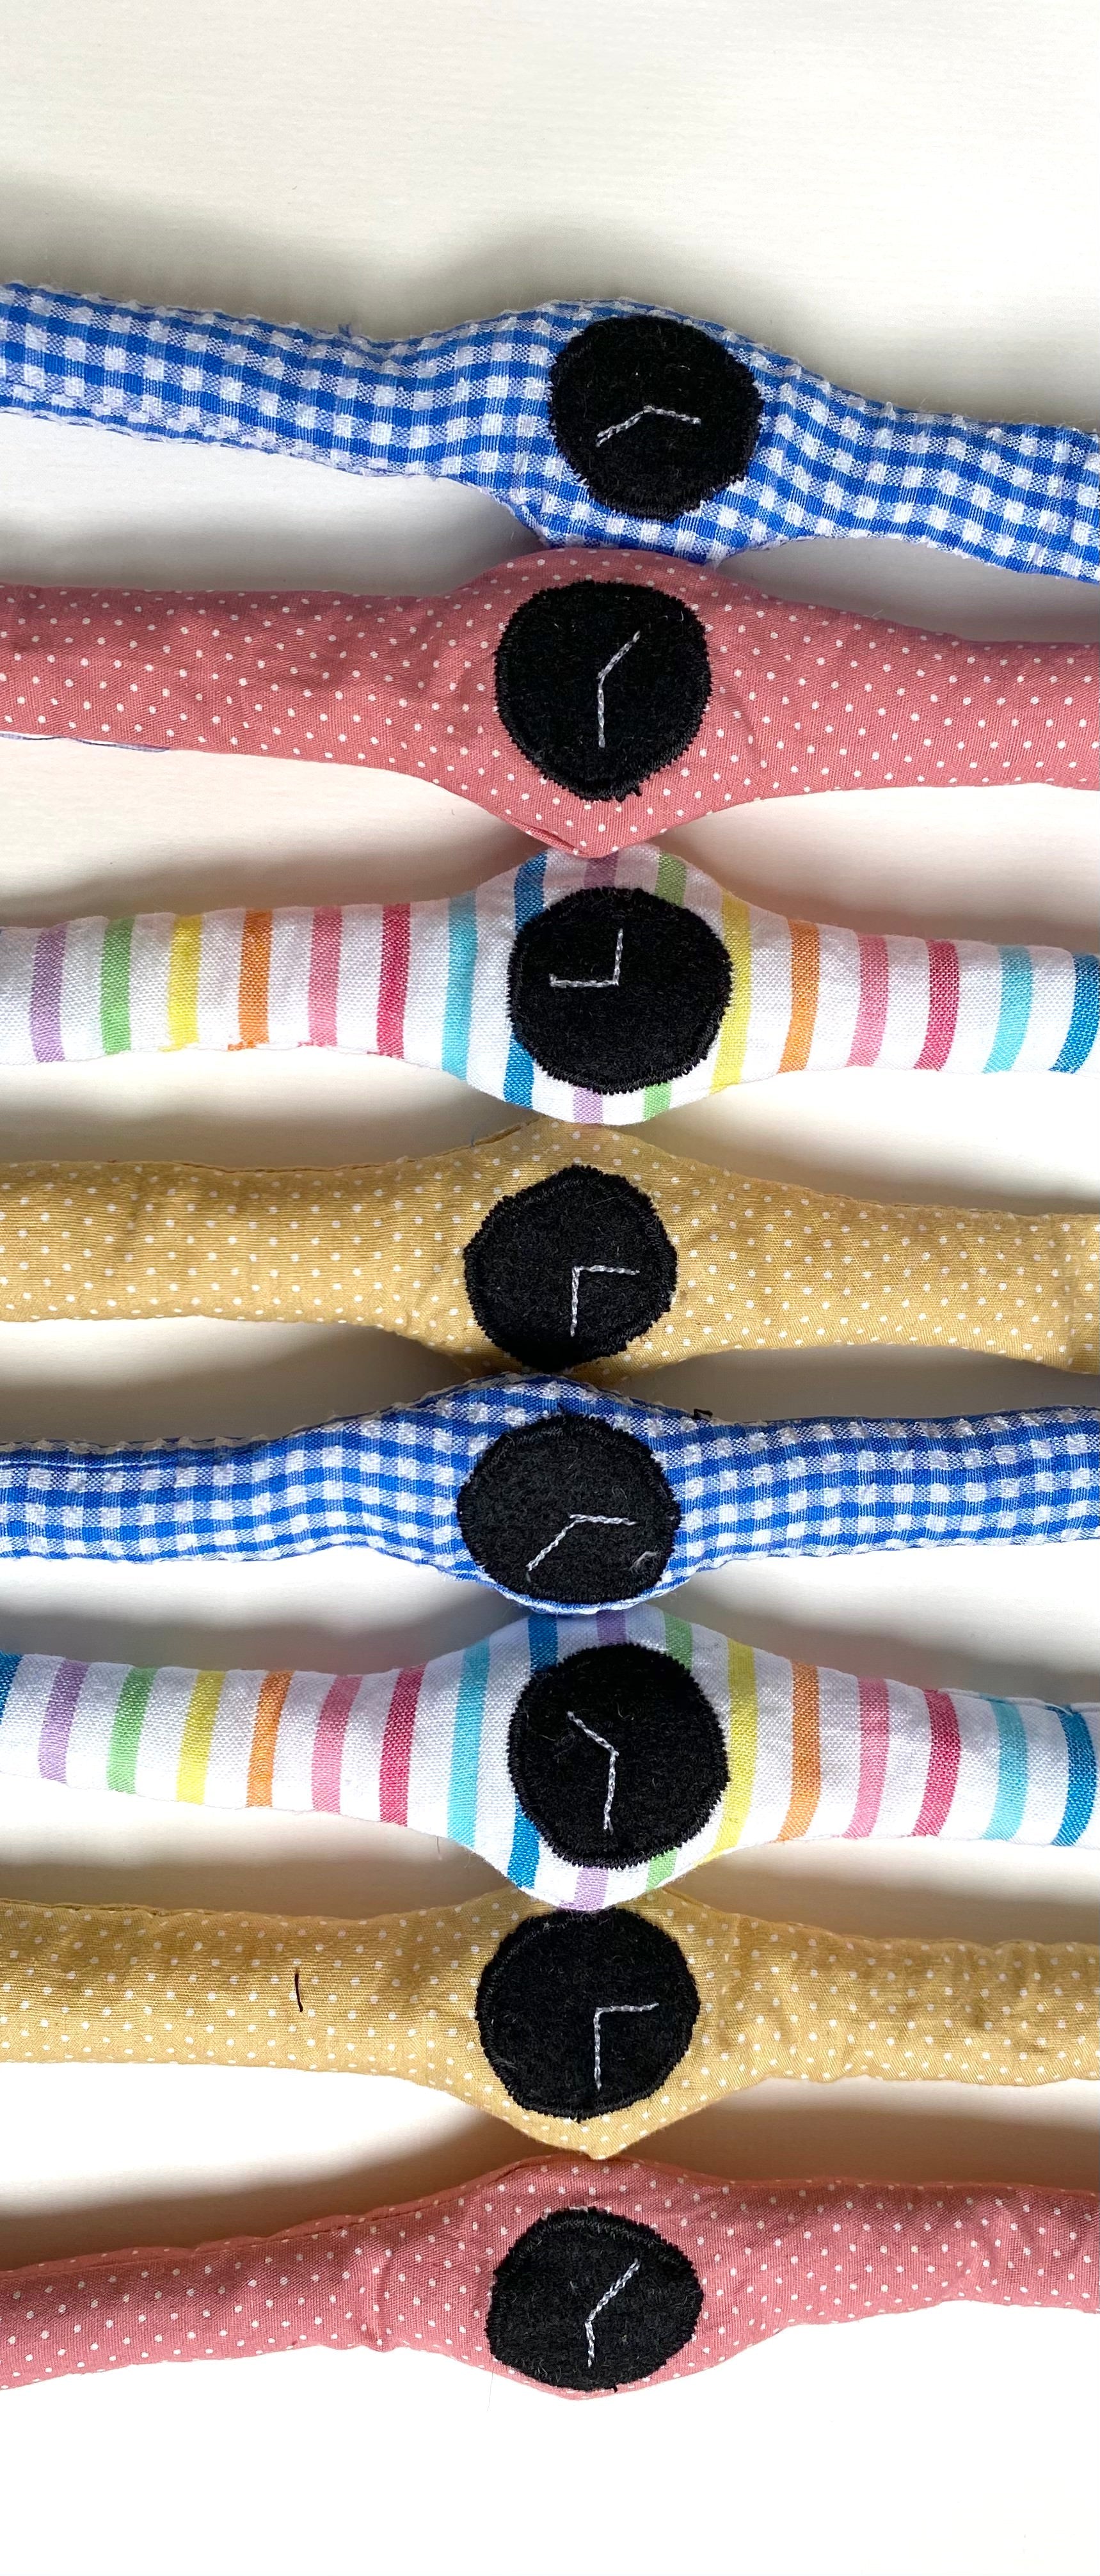 Plush toy watches make perfect party favor or stocking stuffer.